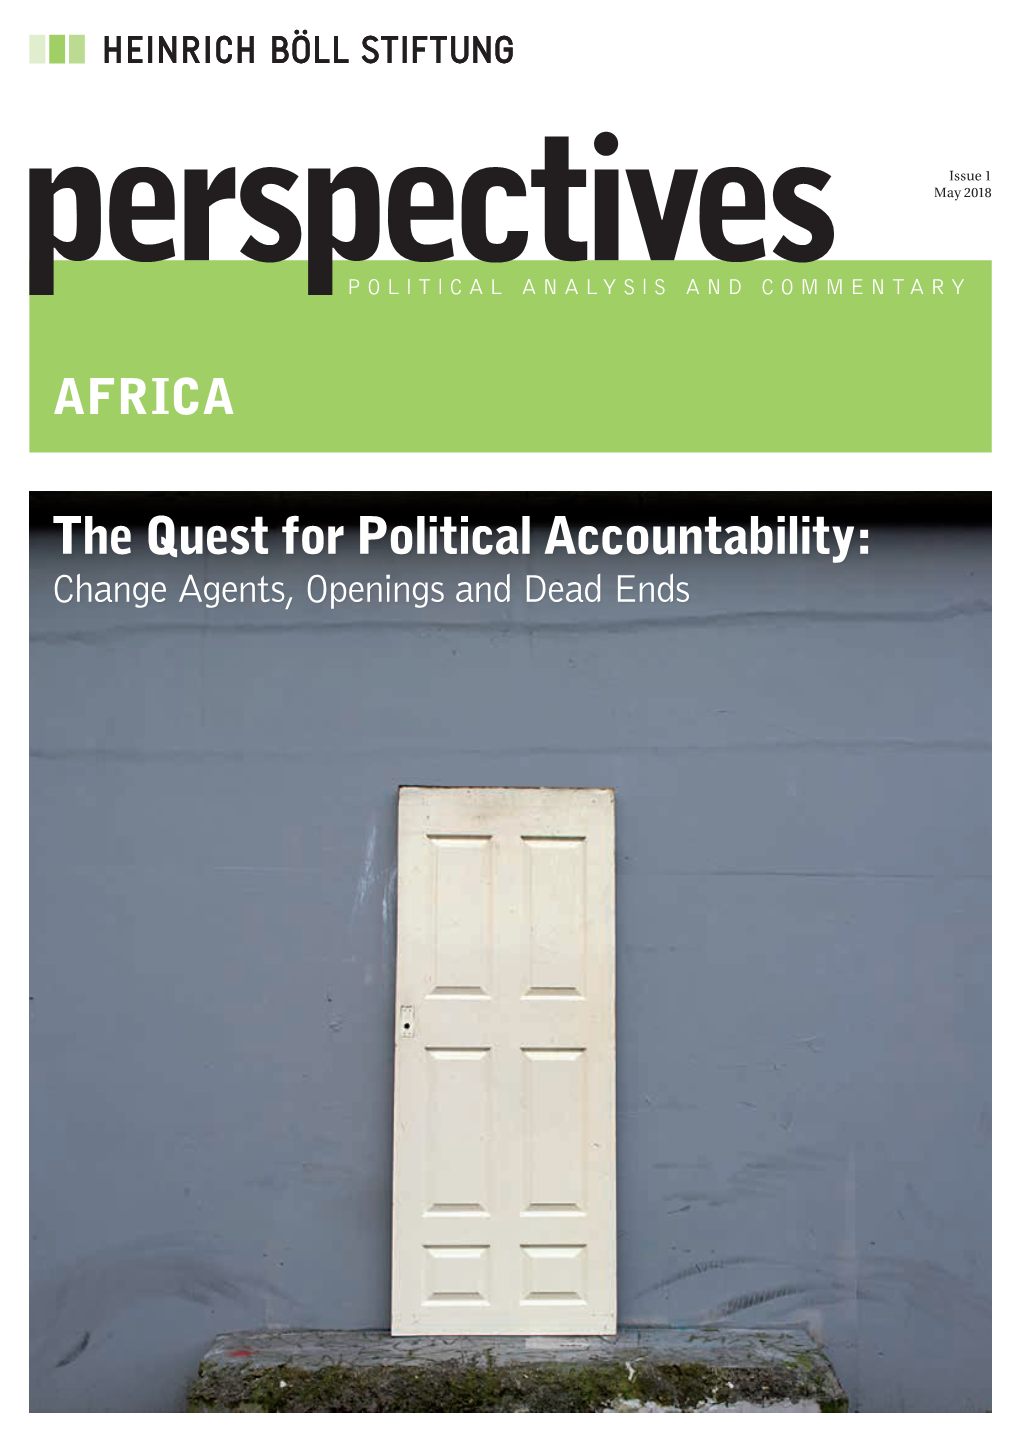 The Quest for Political Accountability